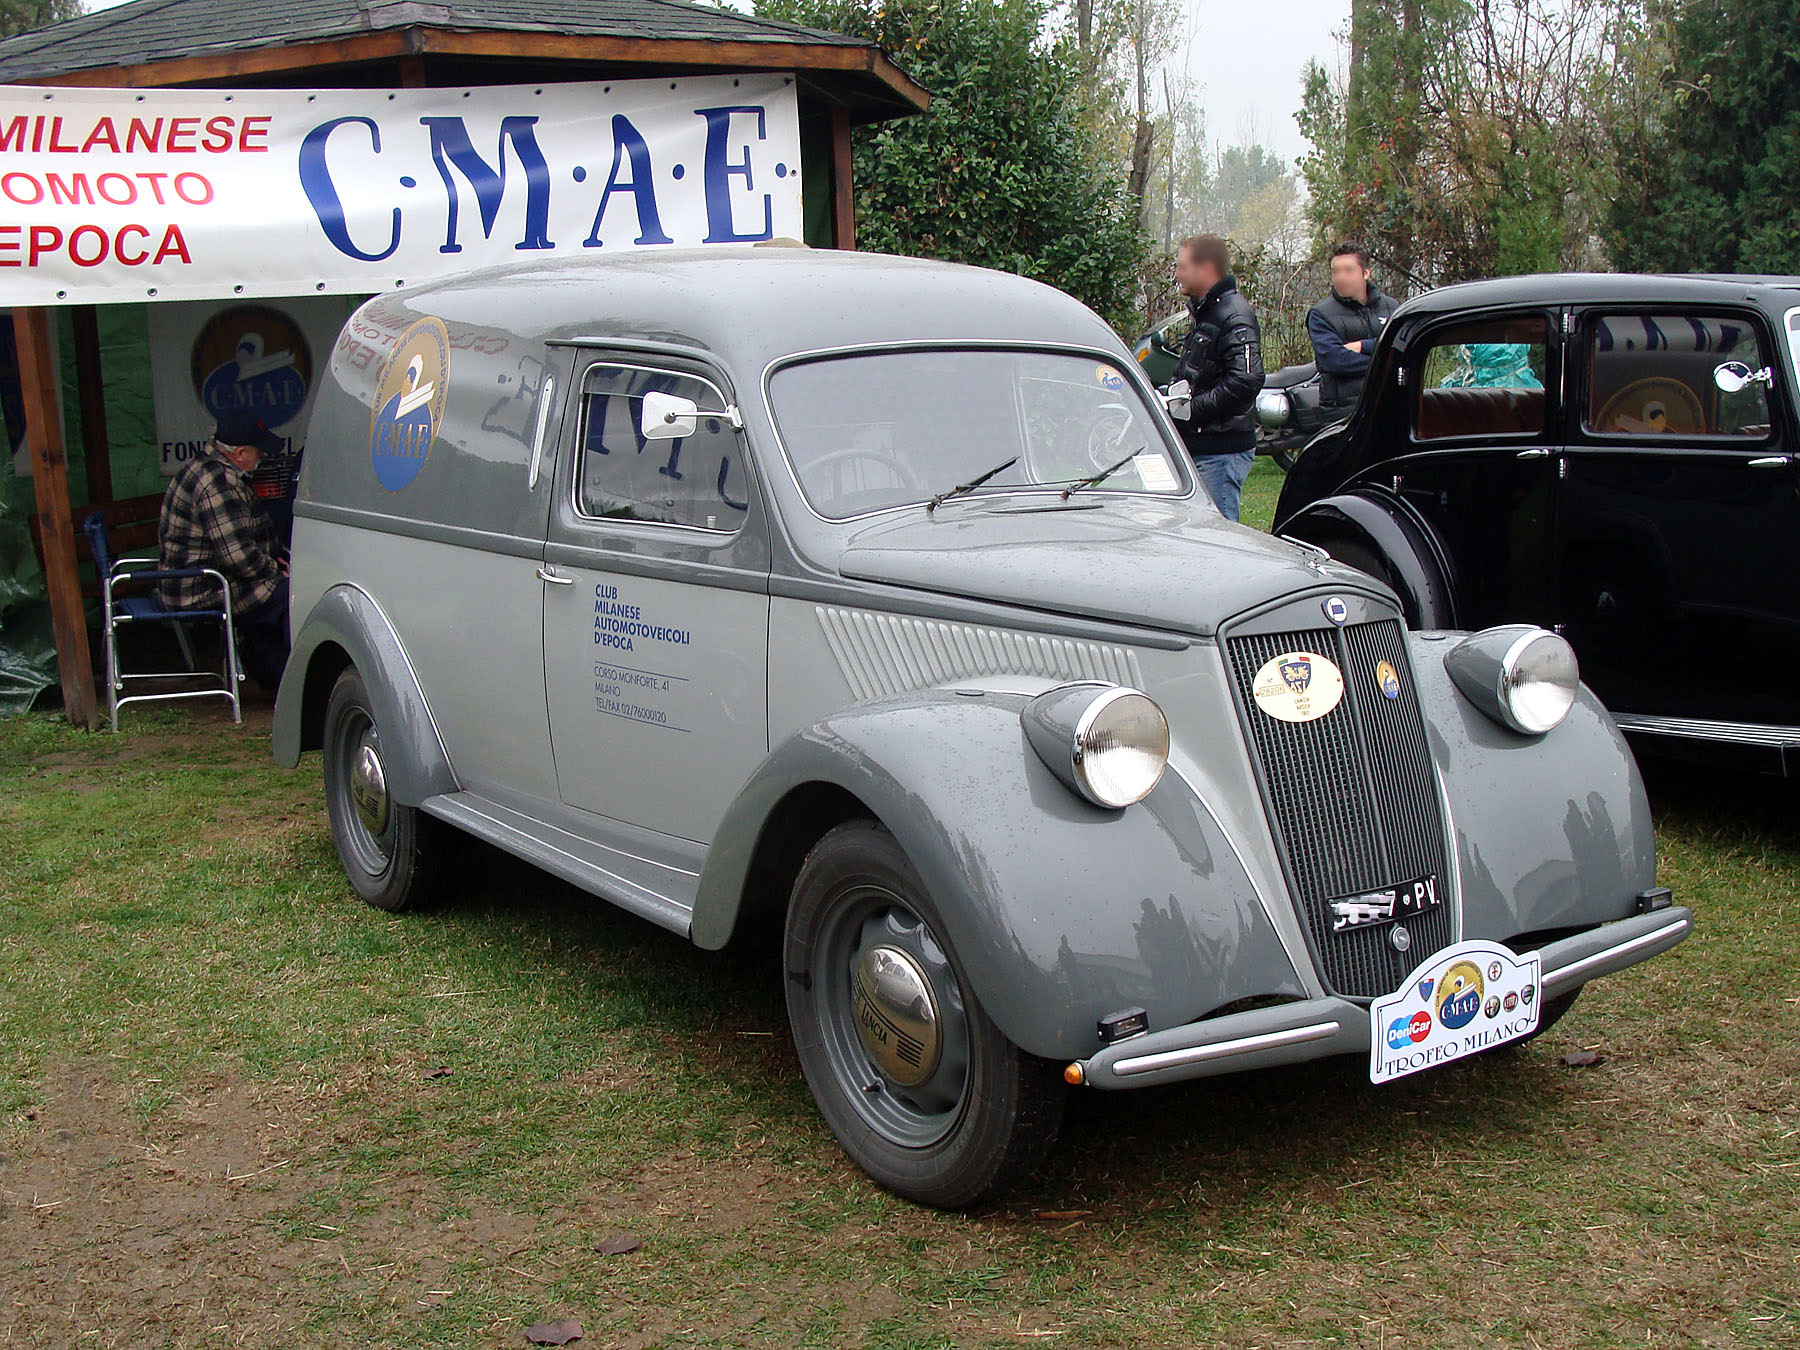 Lancia Ardea Commerciale - 1951 | Flickr - Photo Sharing!